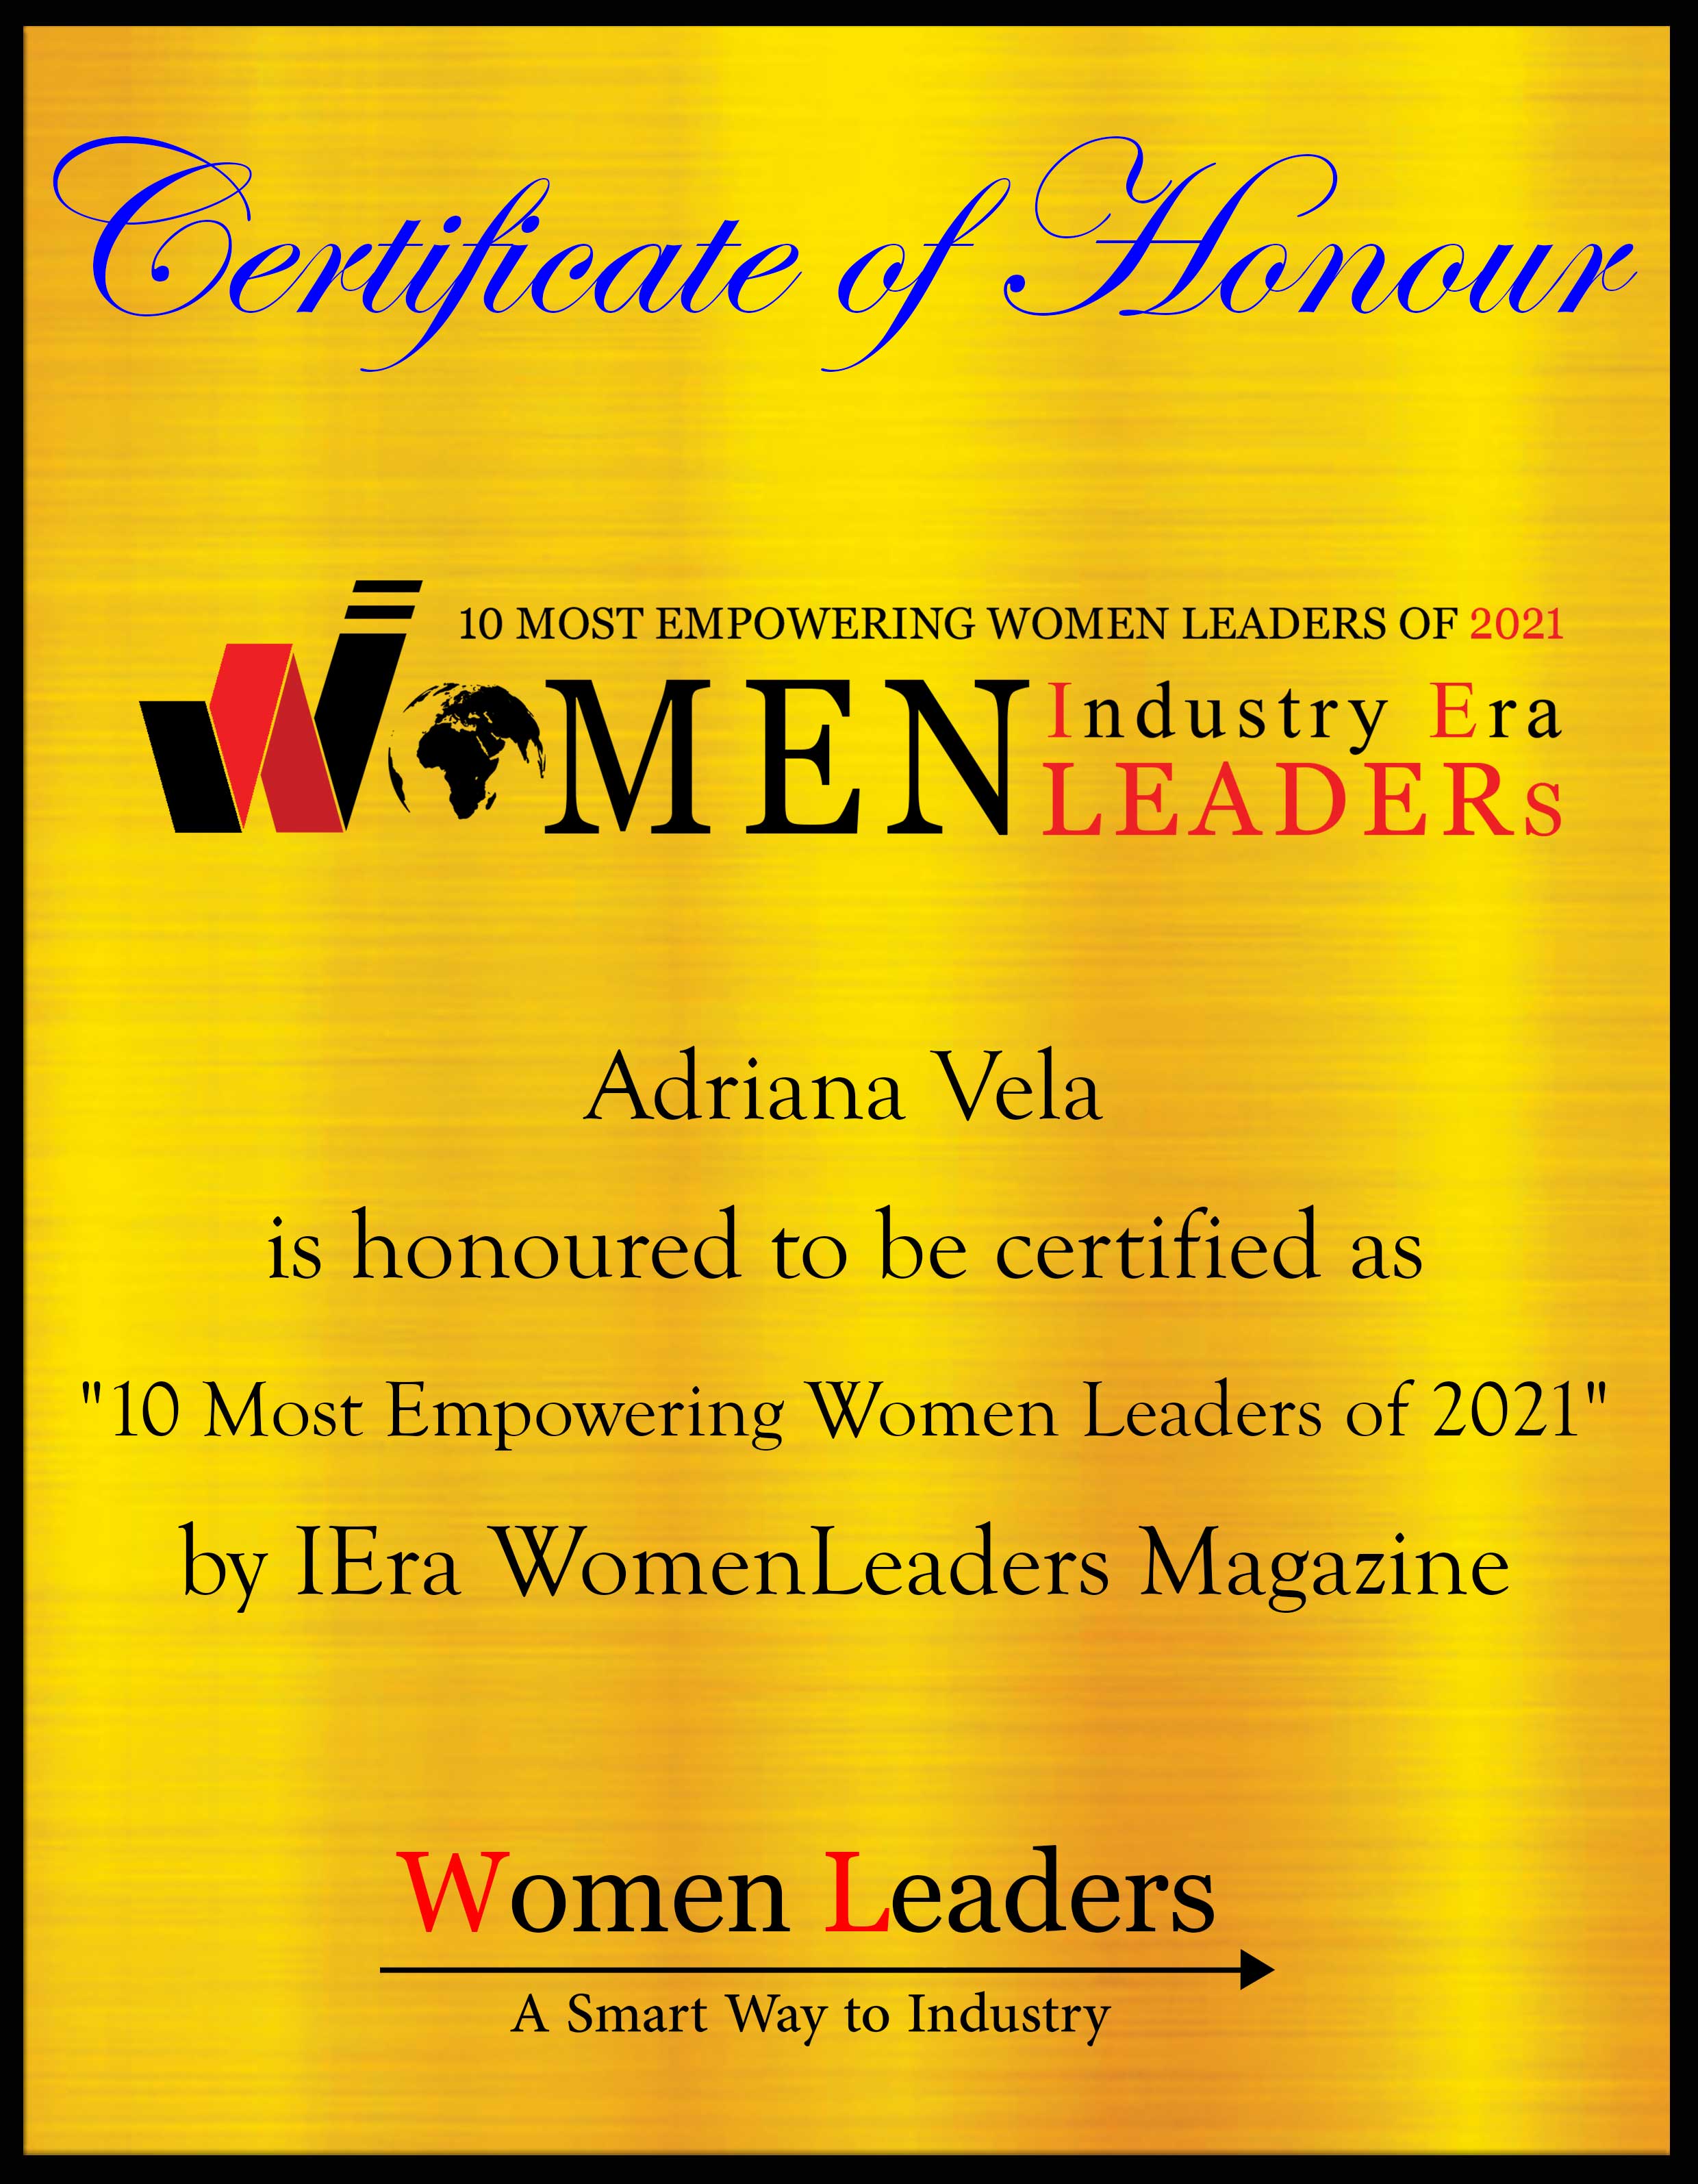 Adriana Vela, Founder and Principal of MarketTecNexus, Most Empowering Women Leaders of 2021